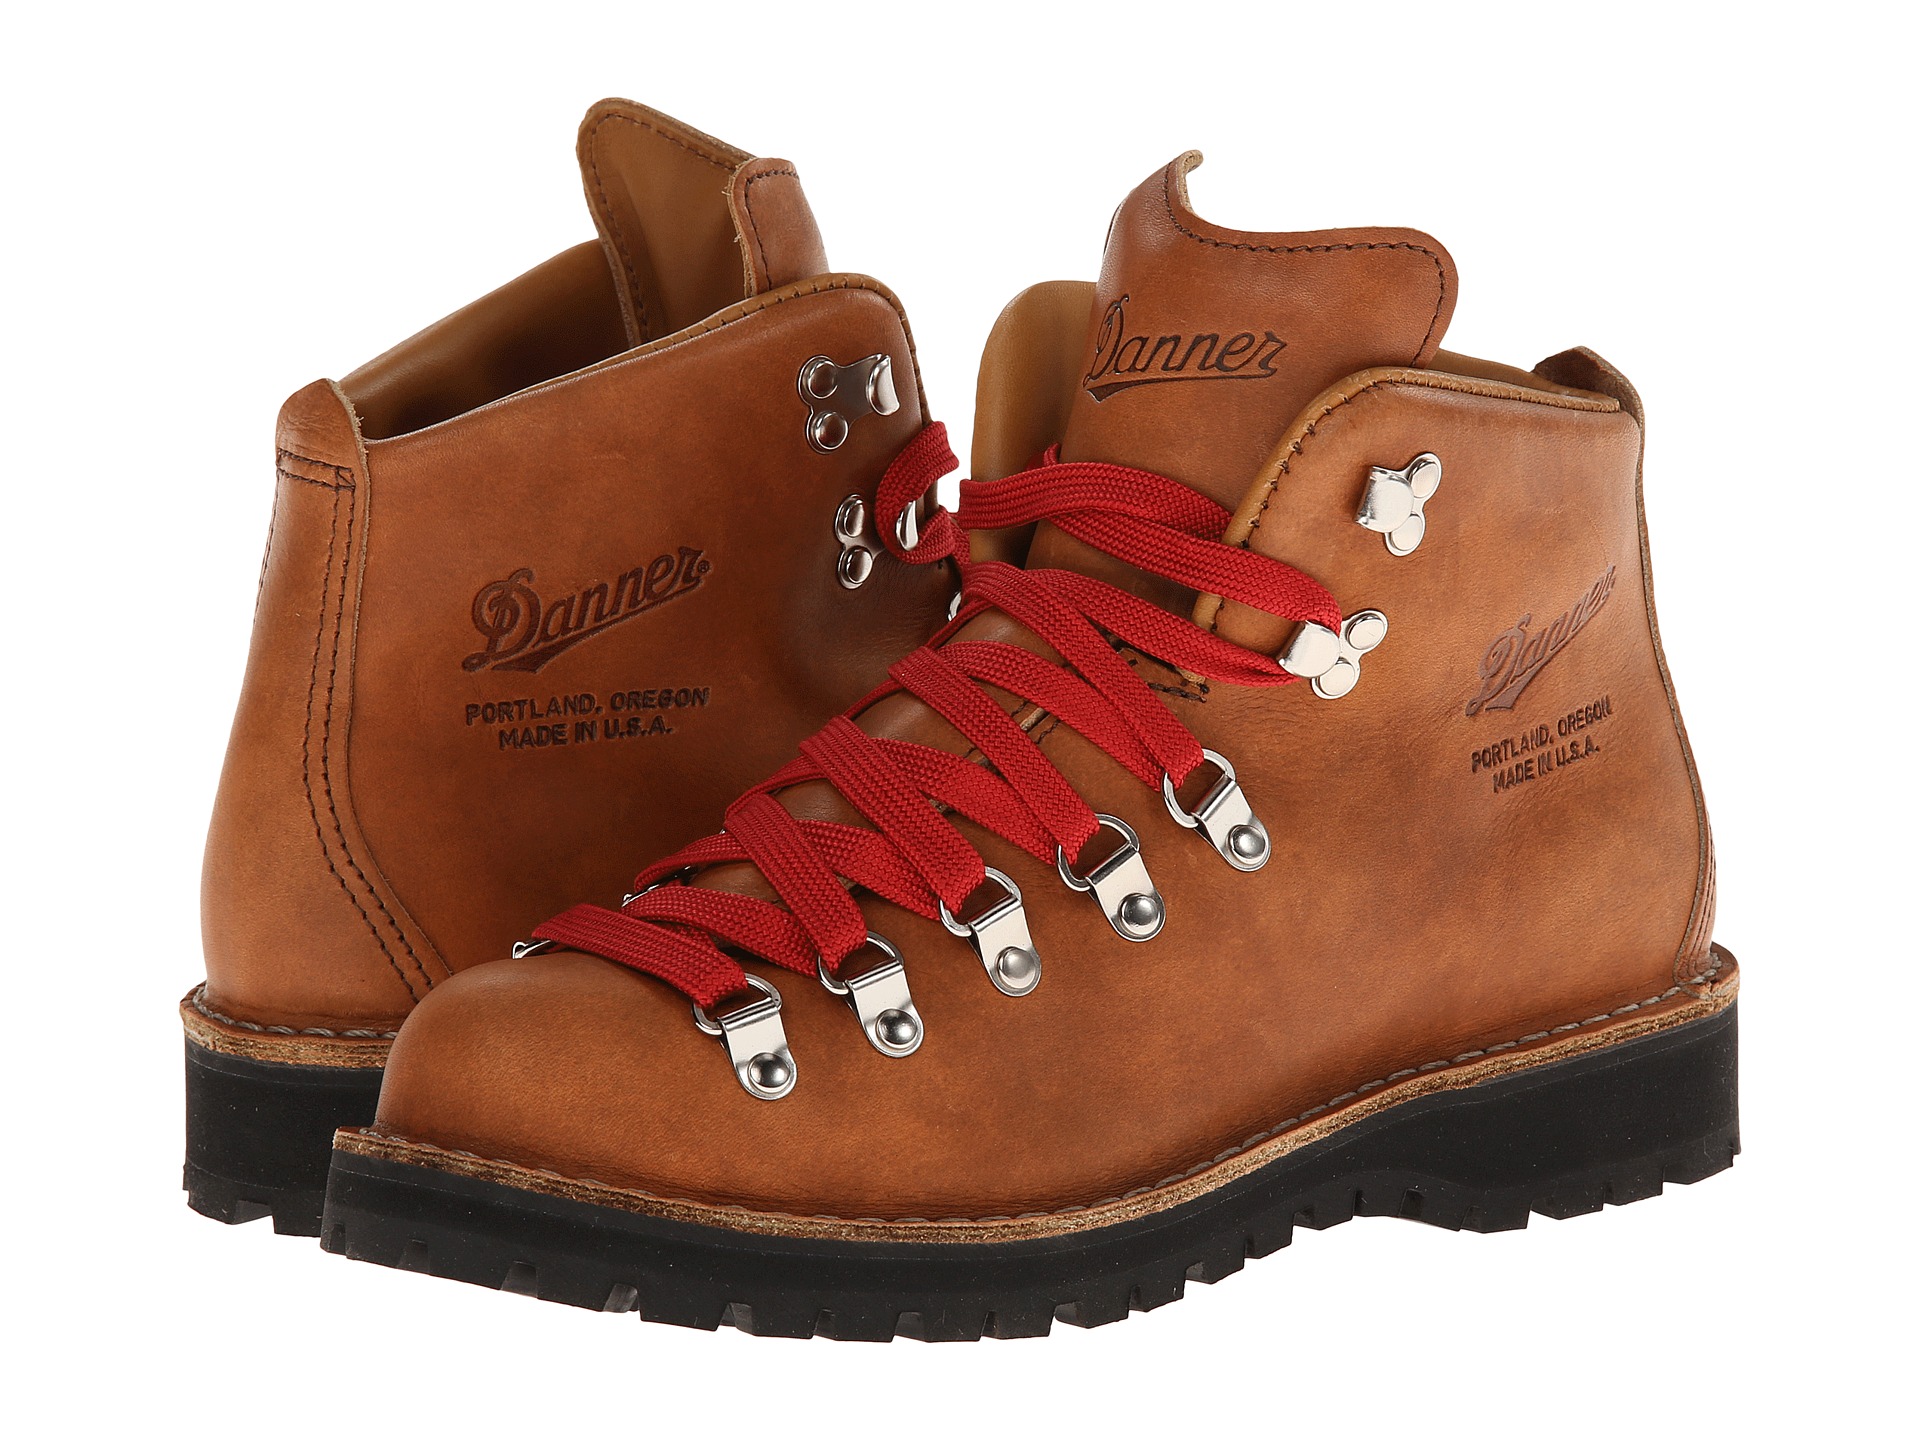 Danner, Boots, Women | Shipped Free at Zappos